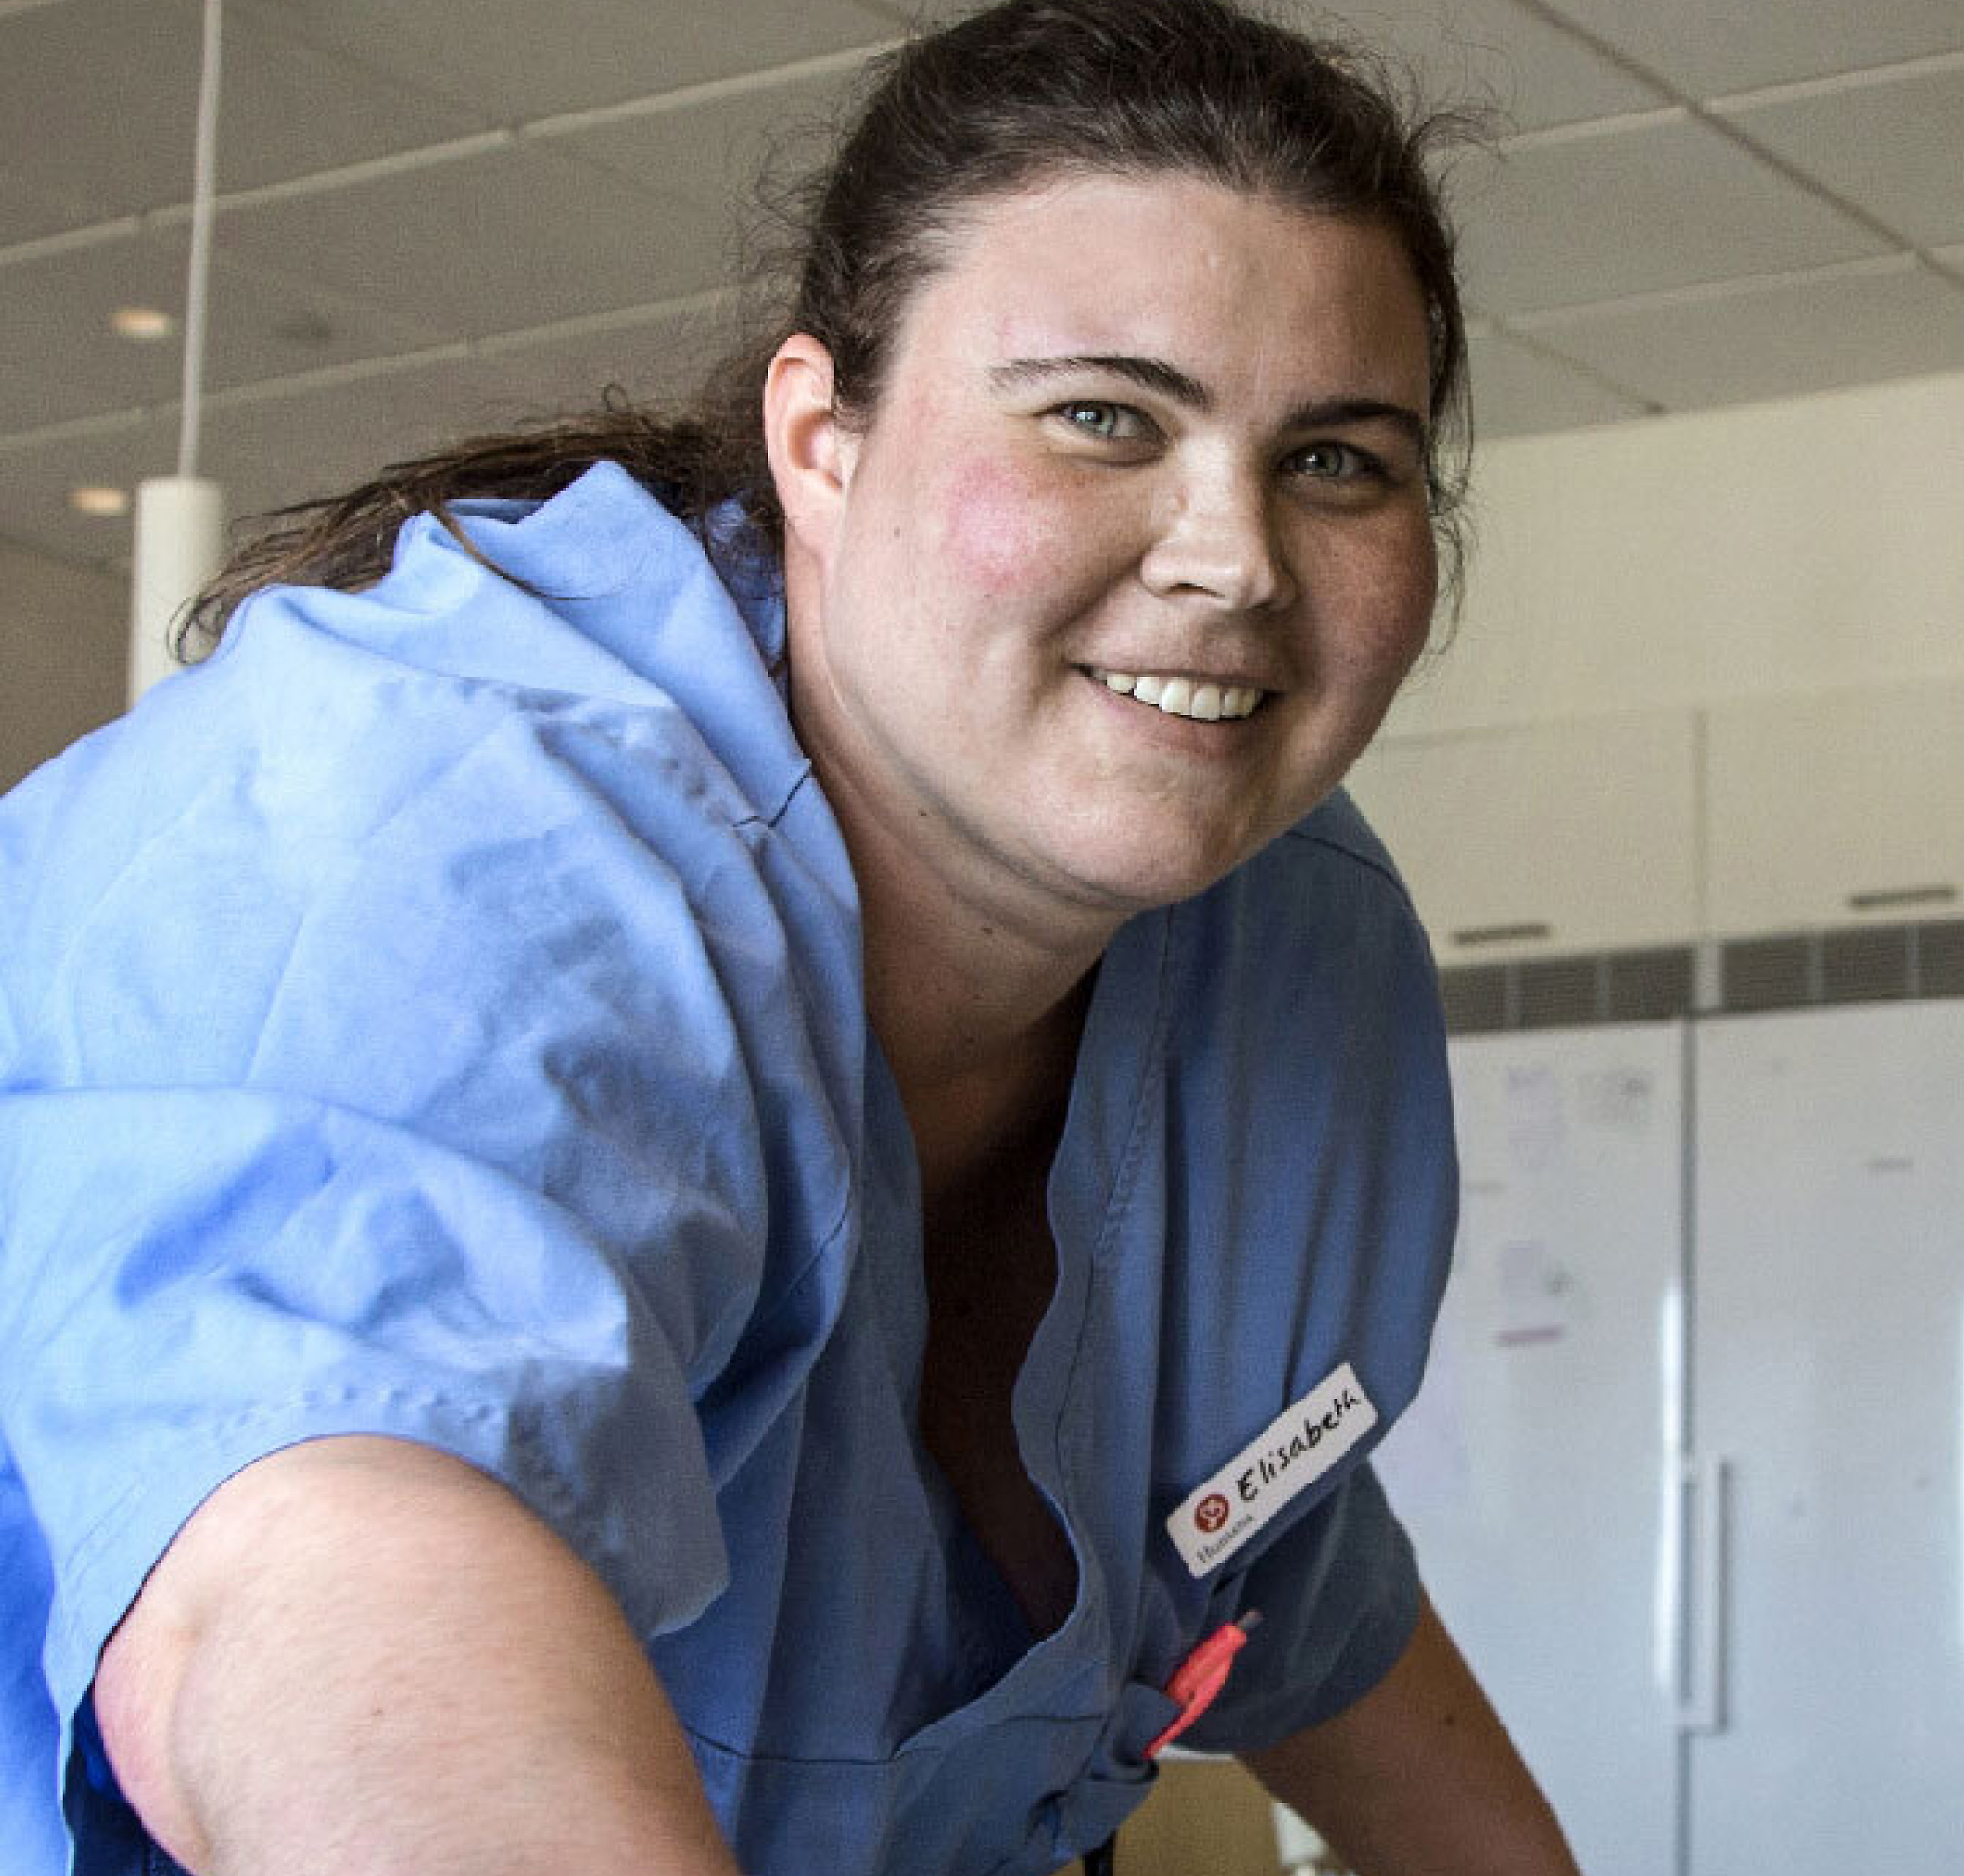 A female nurse with a nametag marked 'elizabeth' smiling in a blue uniform, in a bright, roomy hospital setting.